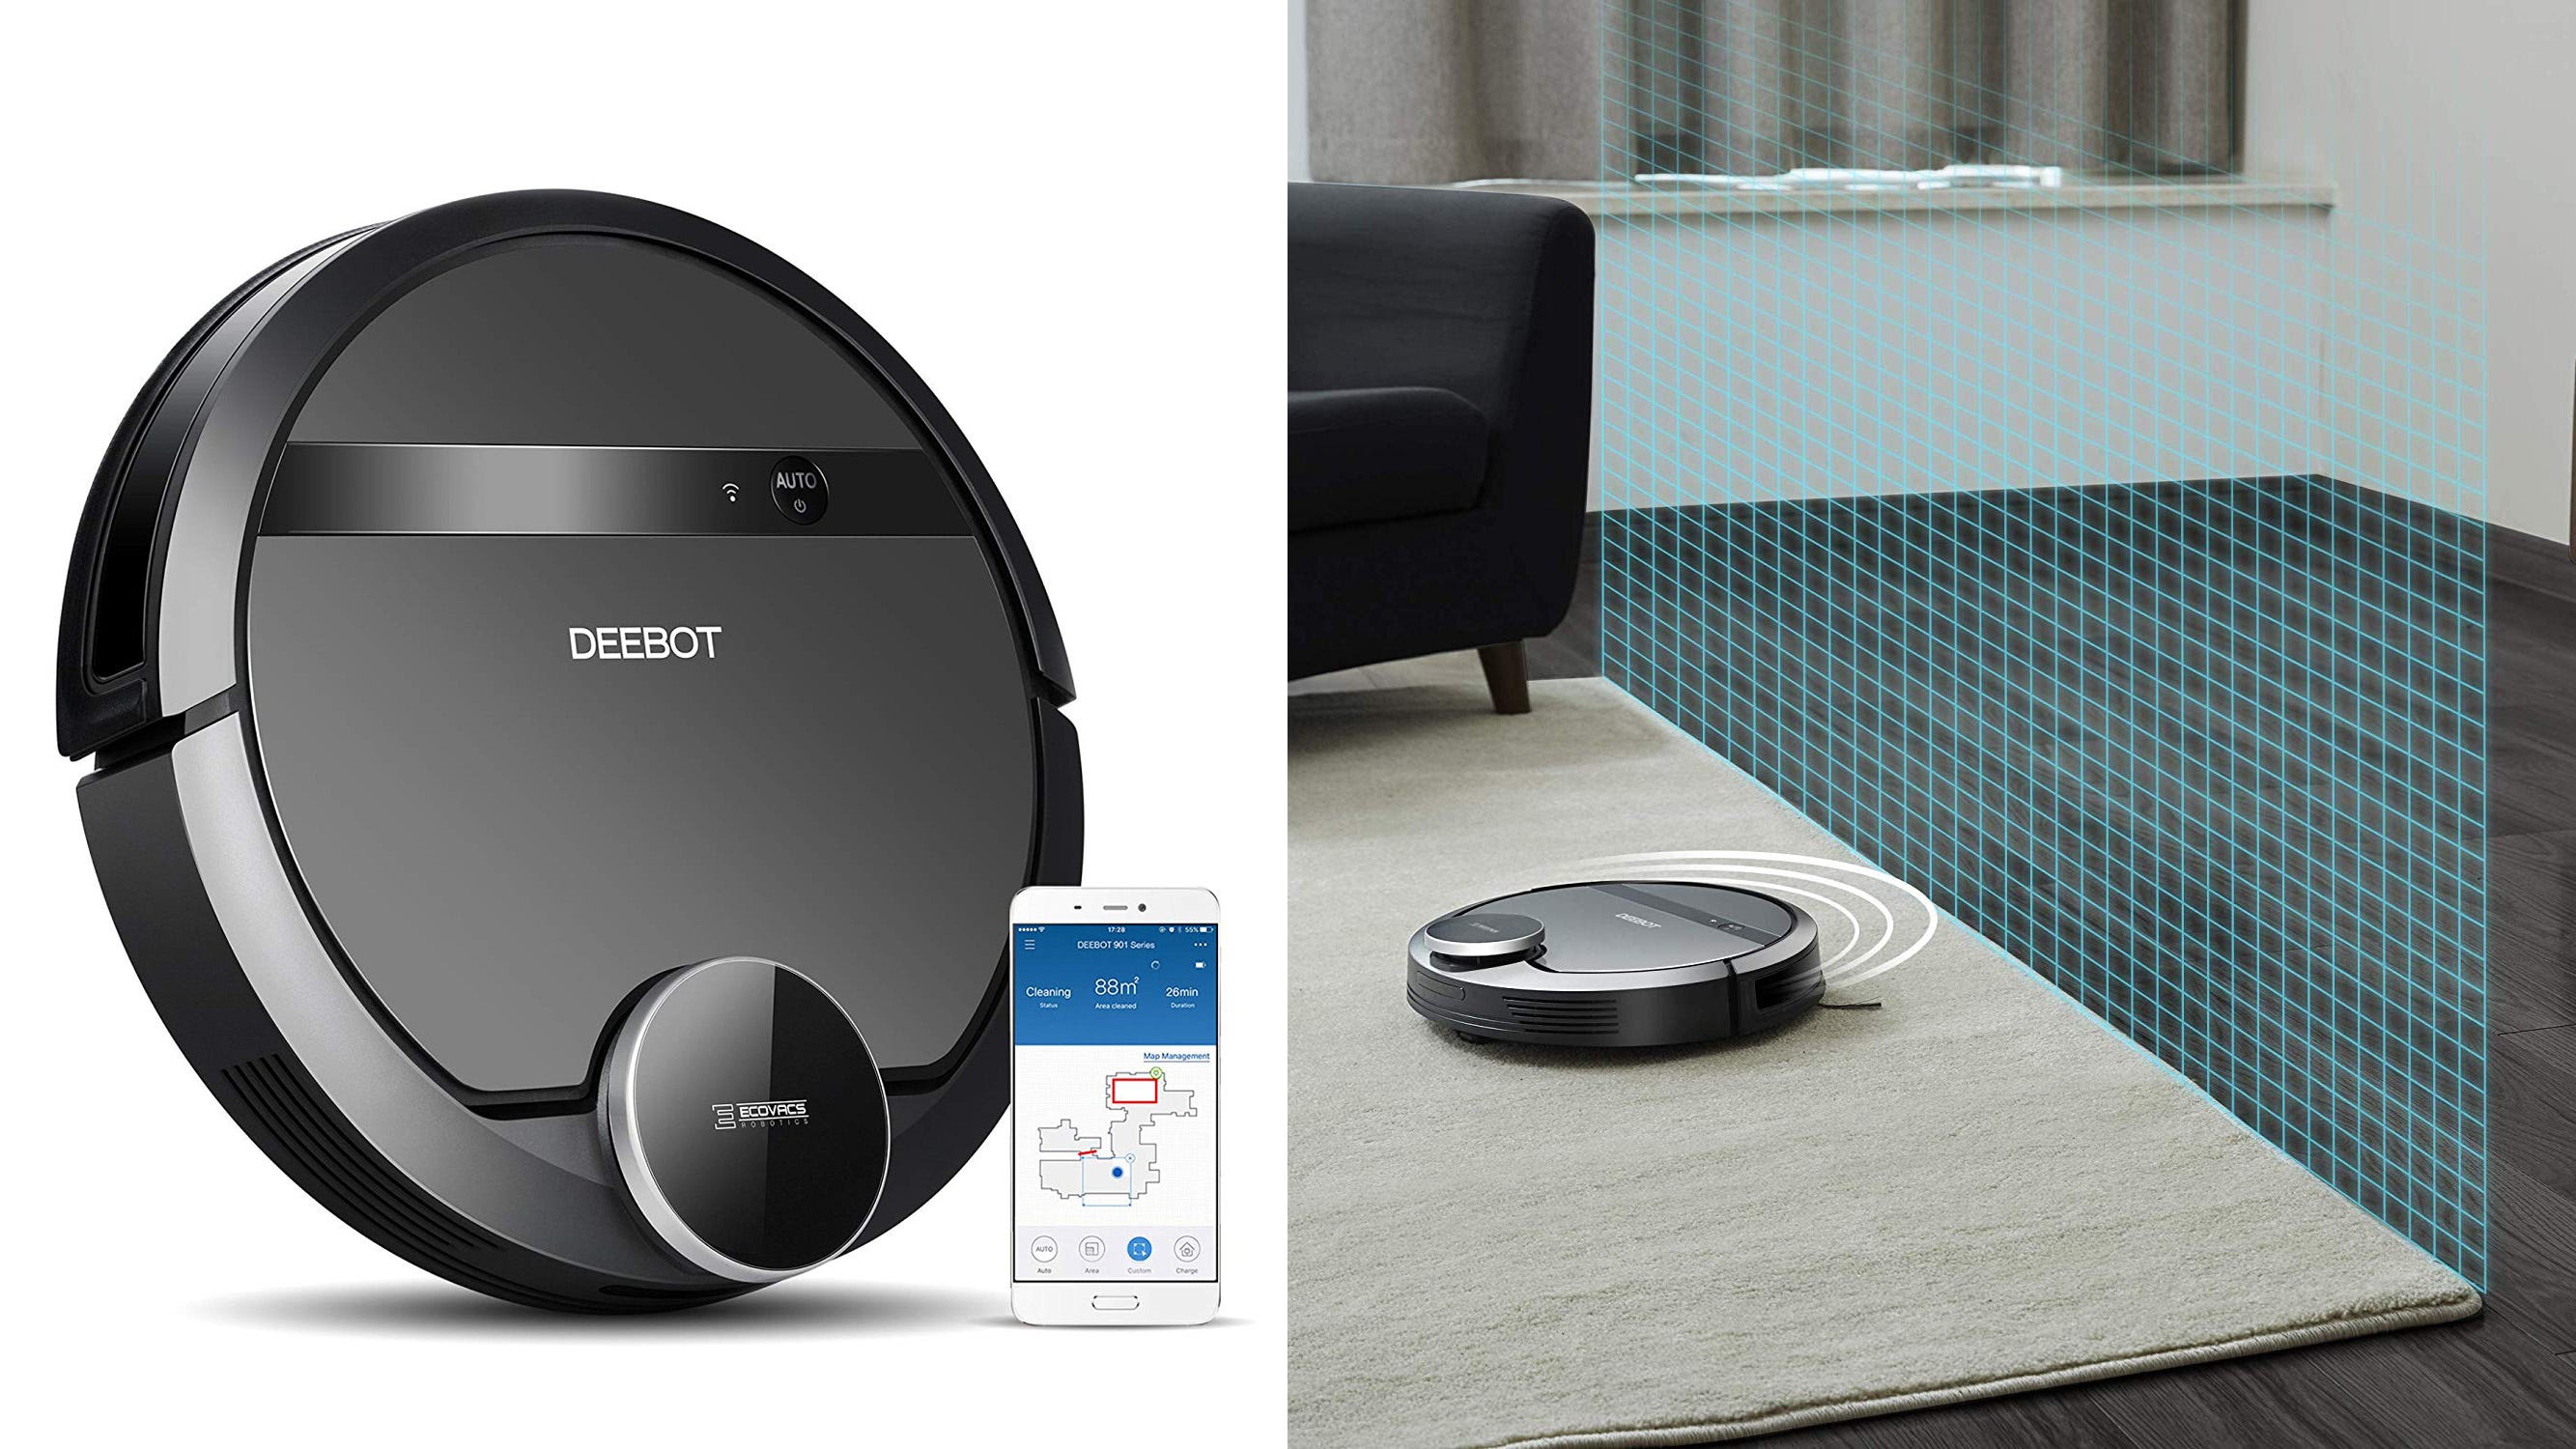 Ecovacs Deebot 901: This smart robot vacuum is at its lowest price ever